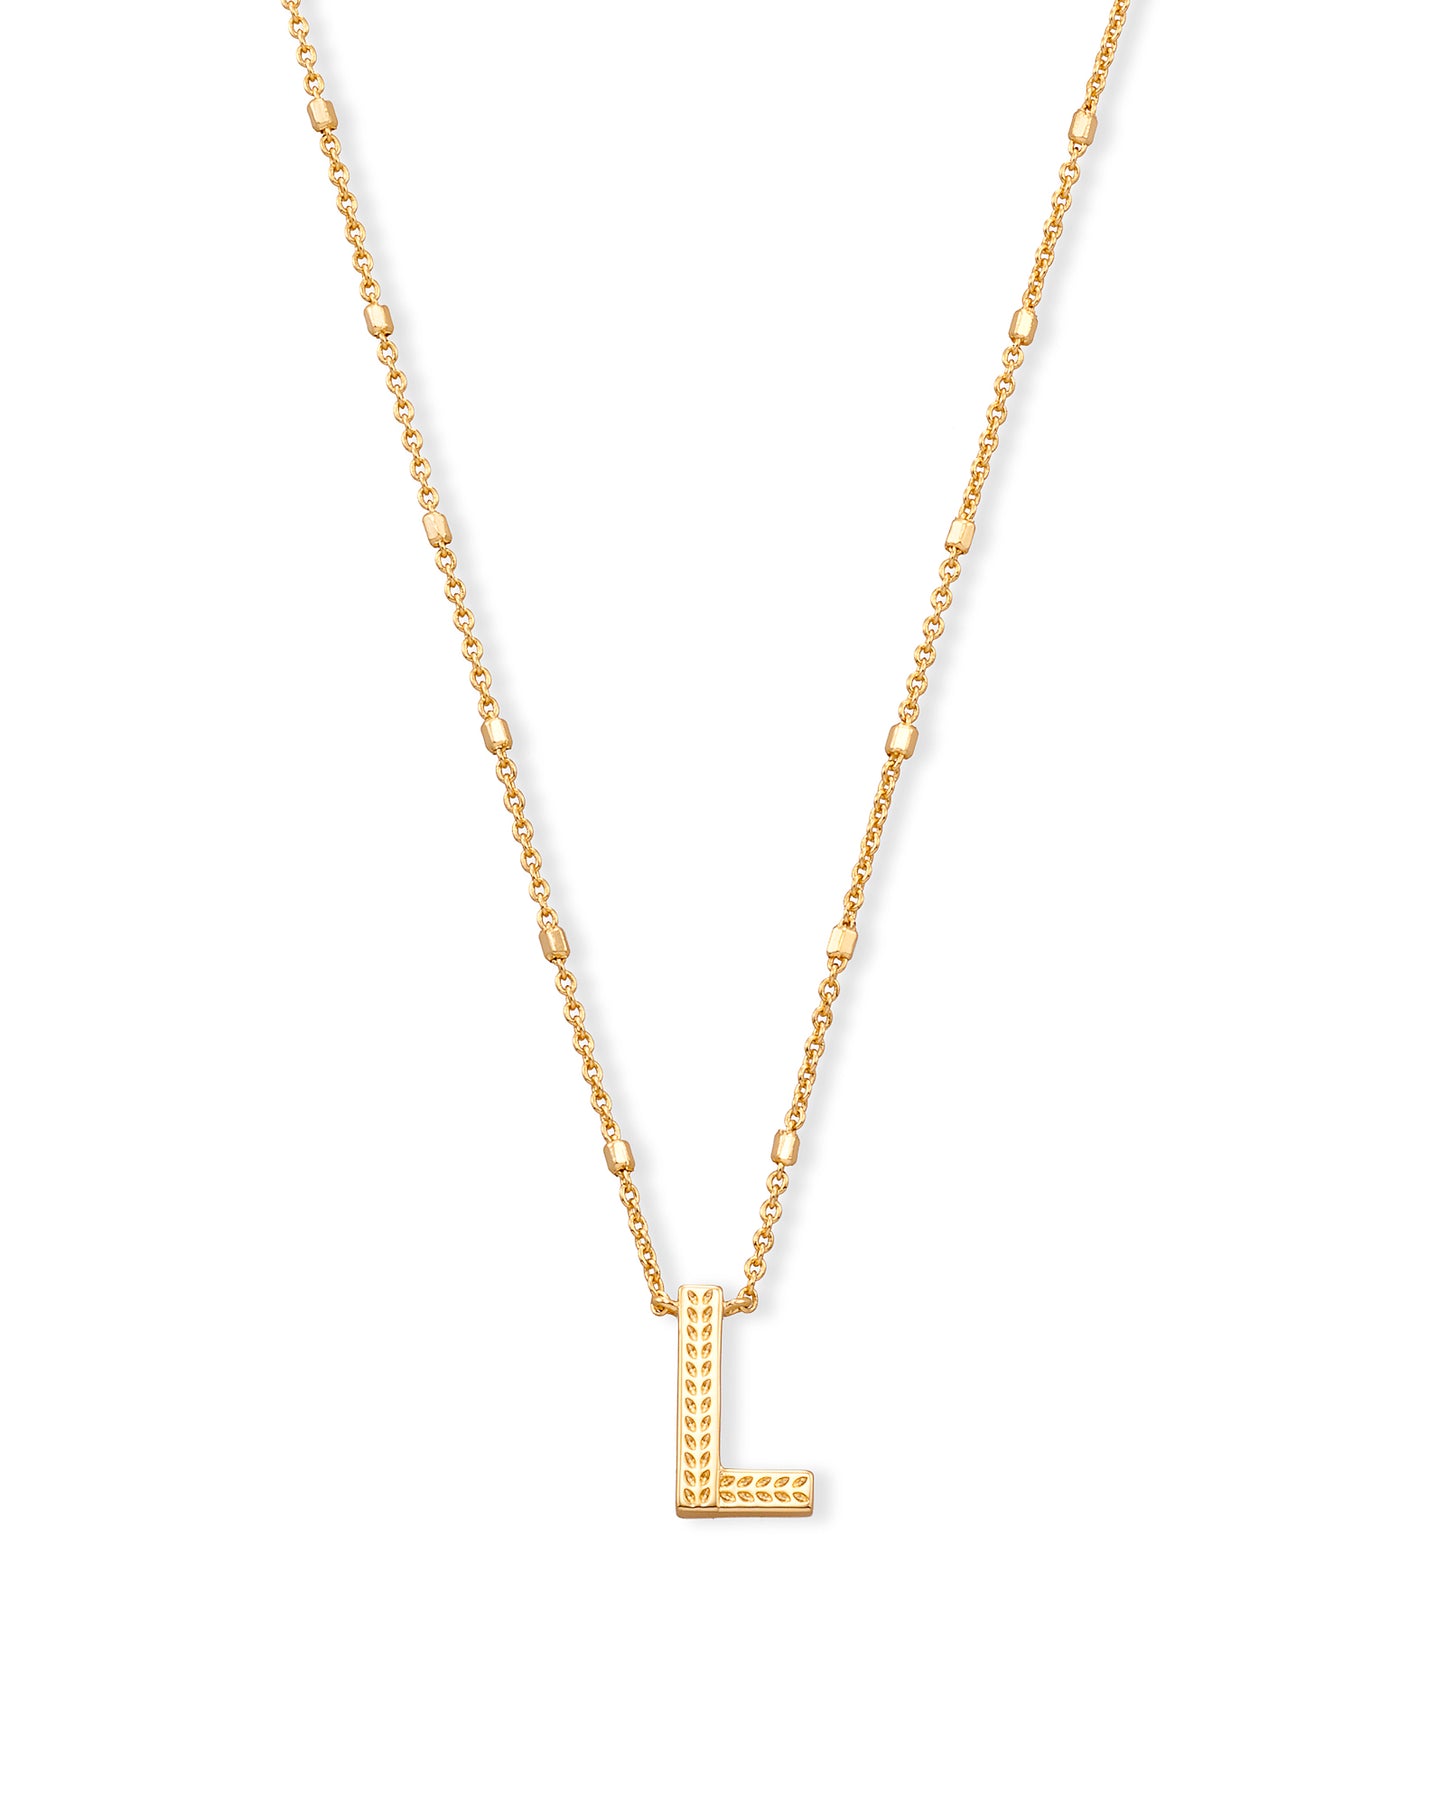 KENDRA SCOTT: Initial Necklace in Gold